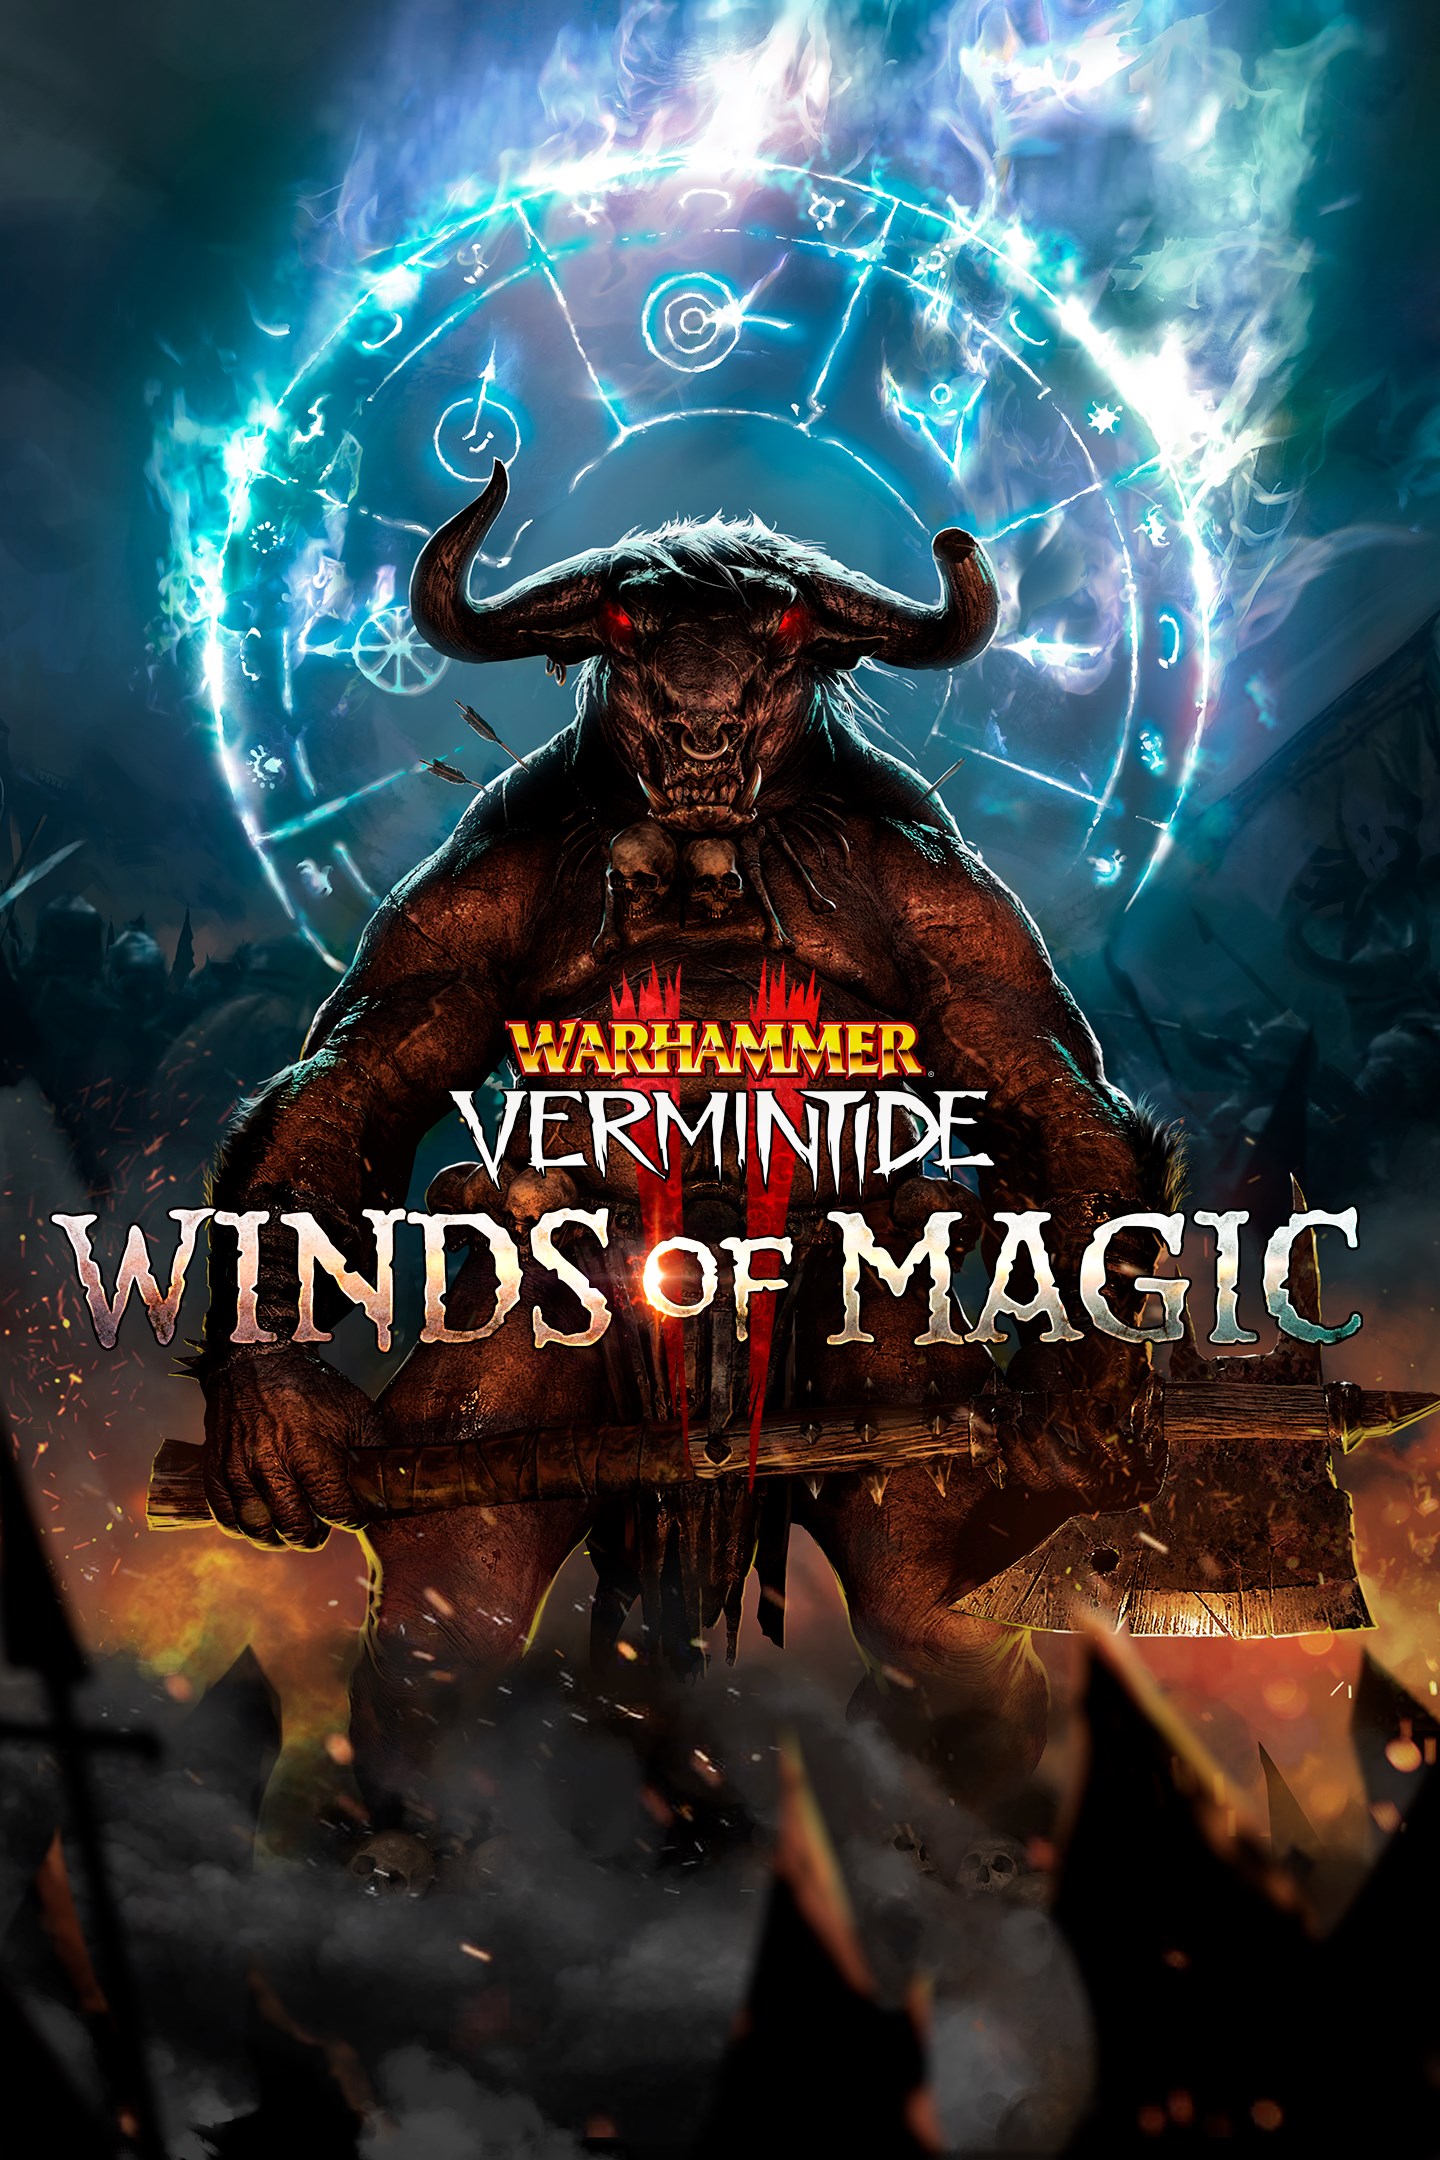 warhammer vermintide 2 winds of magic xbox one